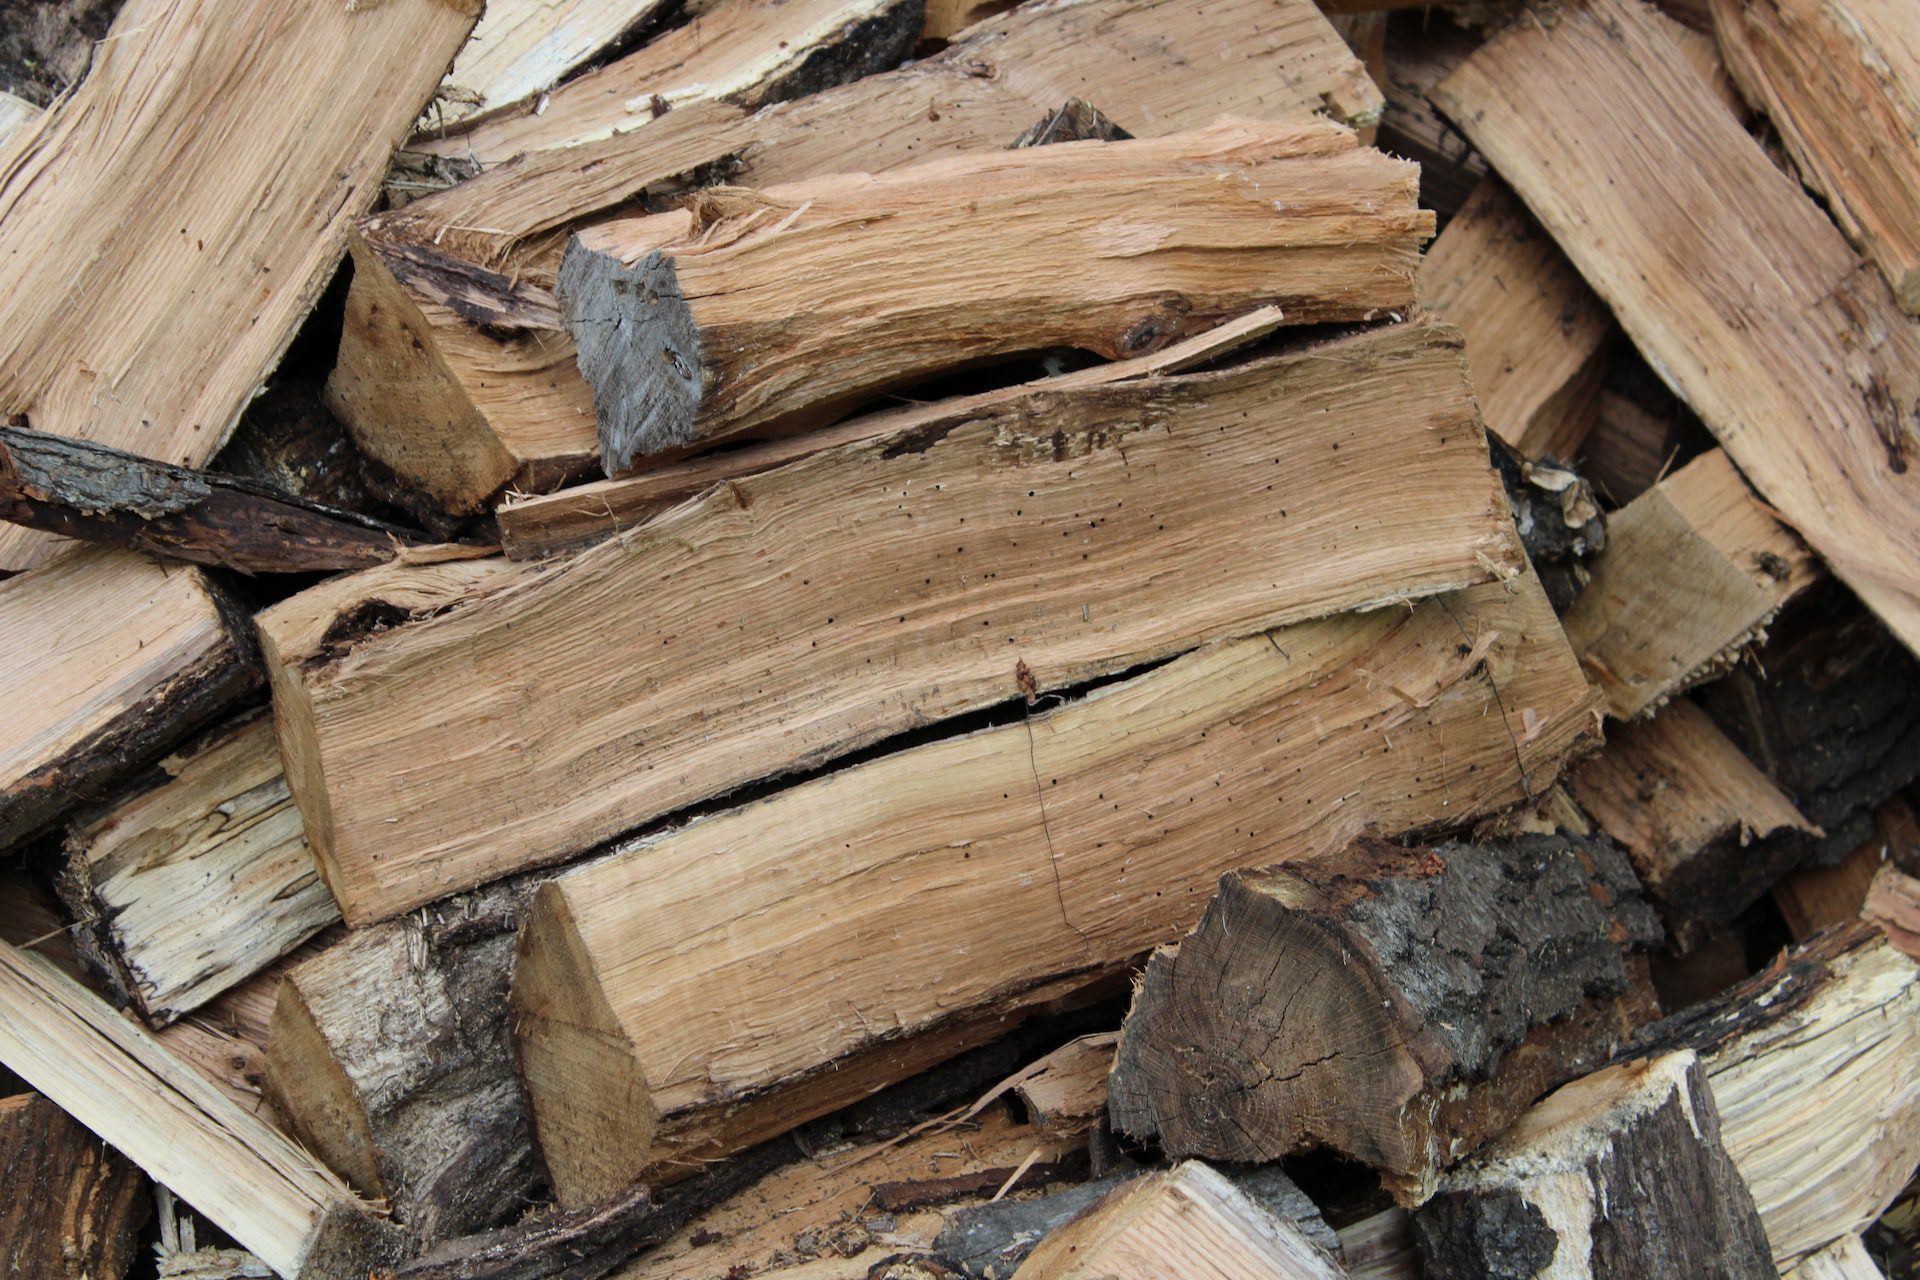 Check firewood for insects before bringing in a house.